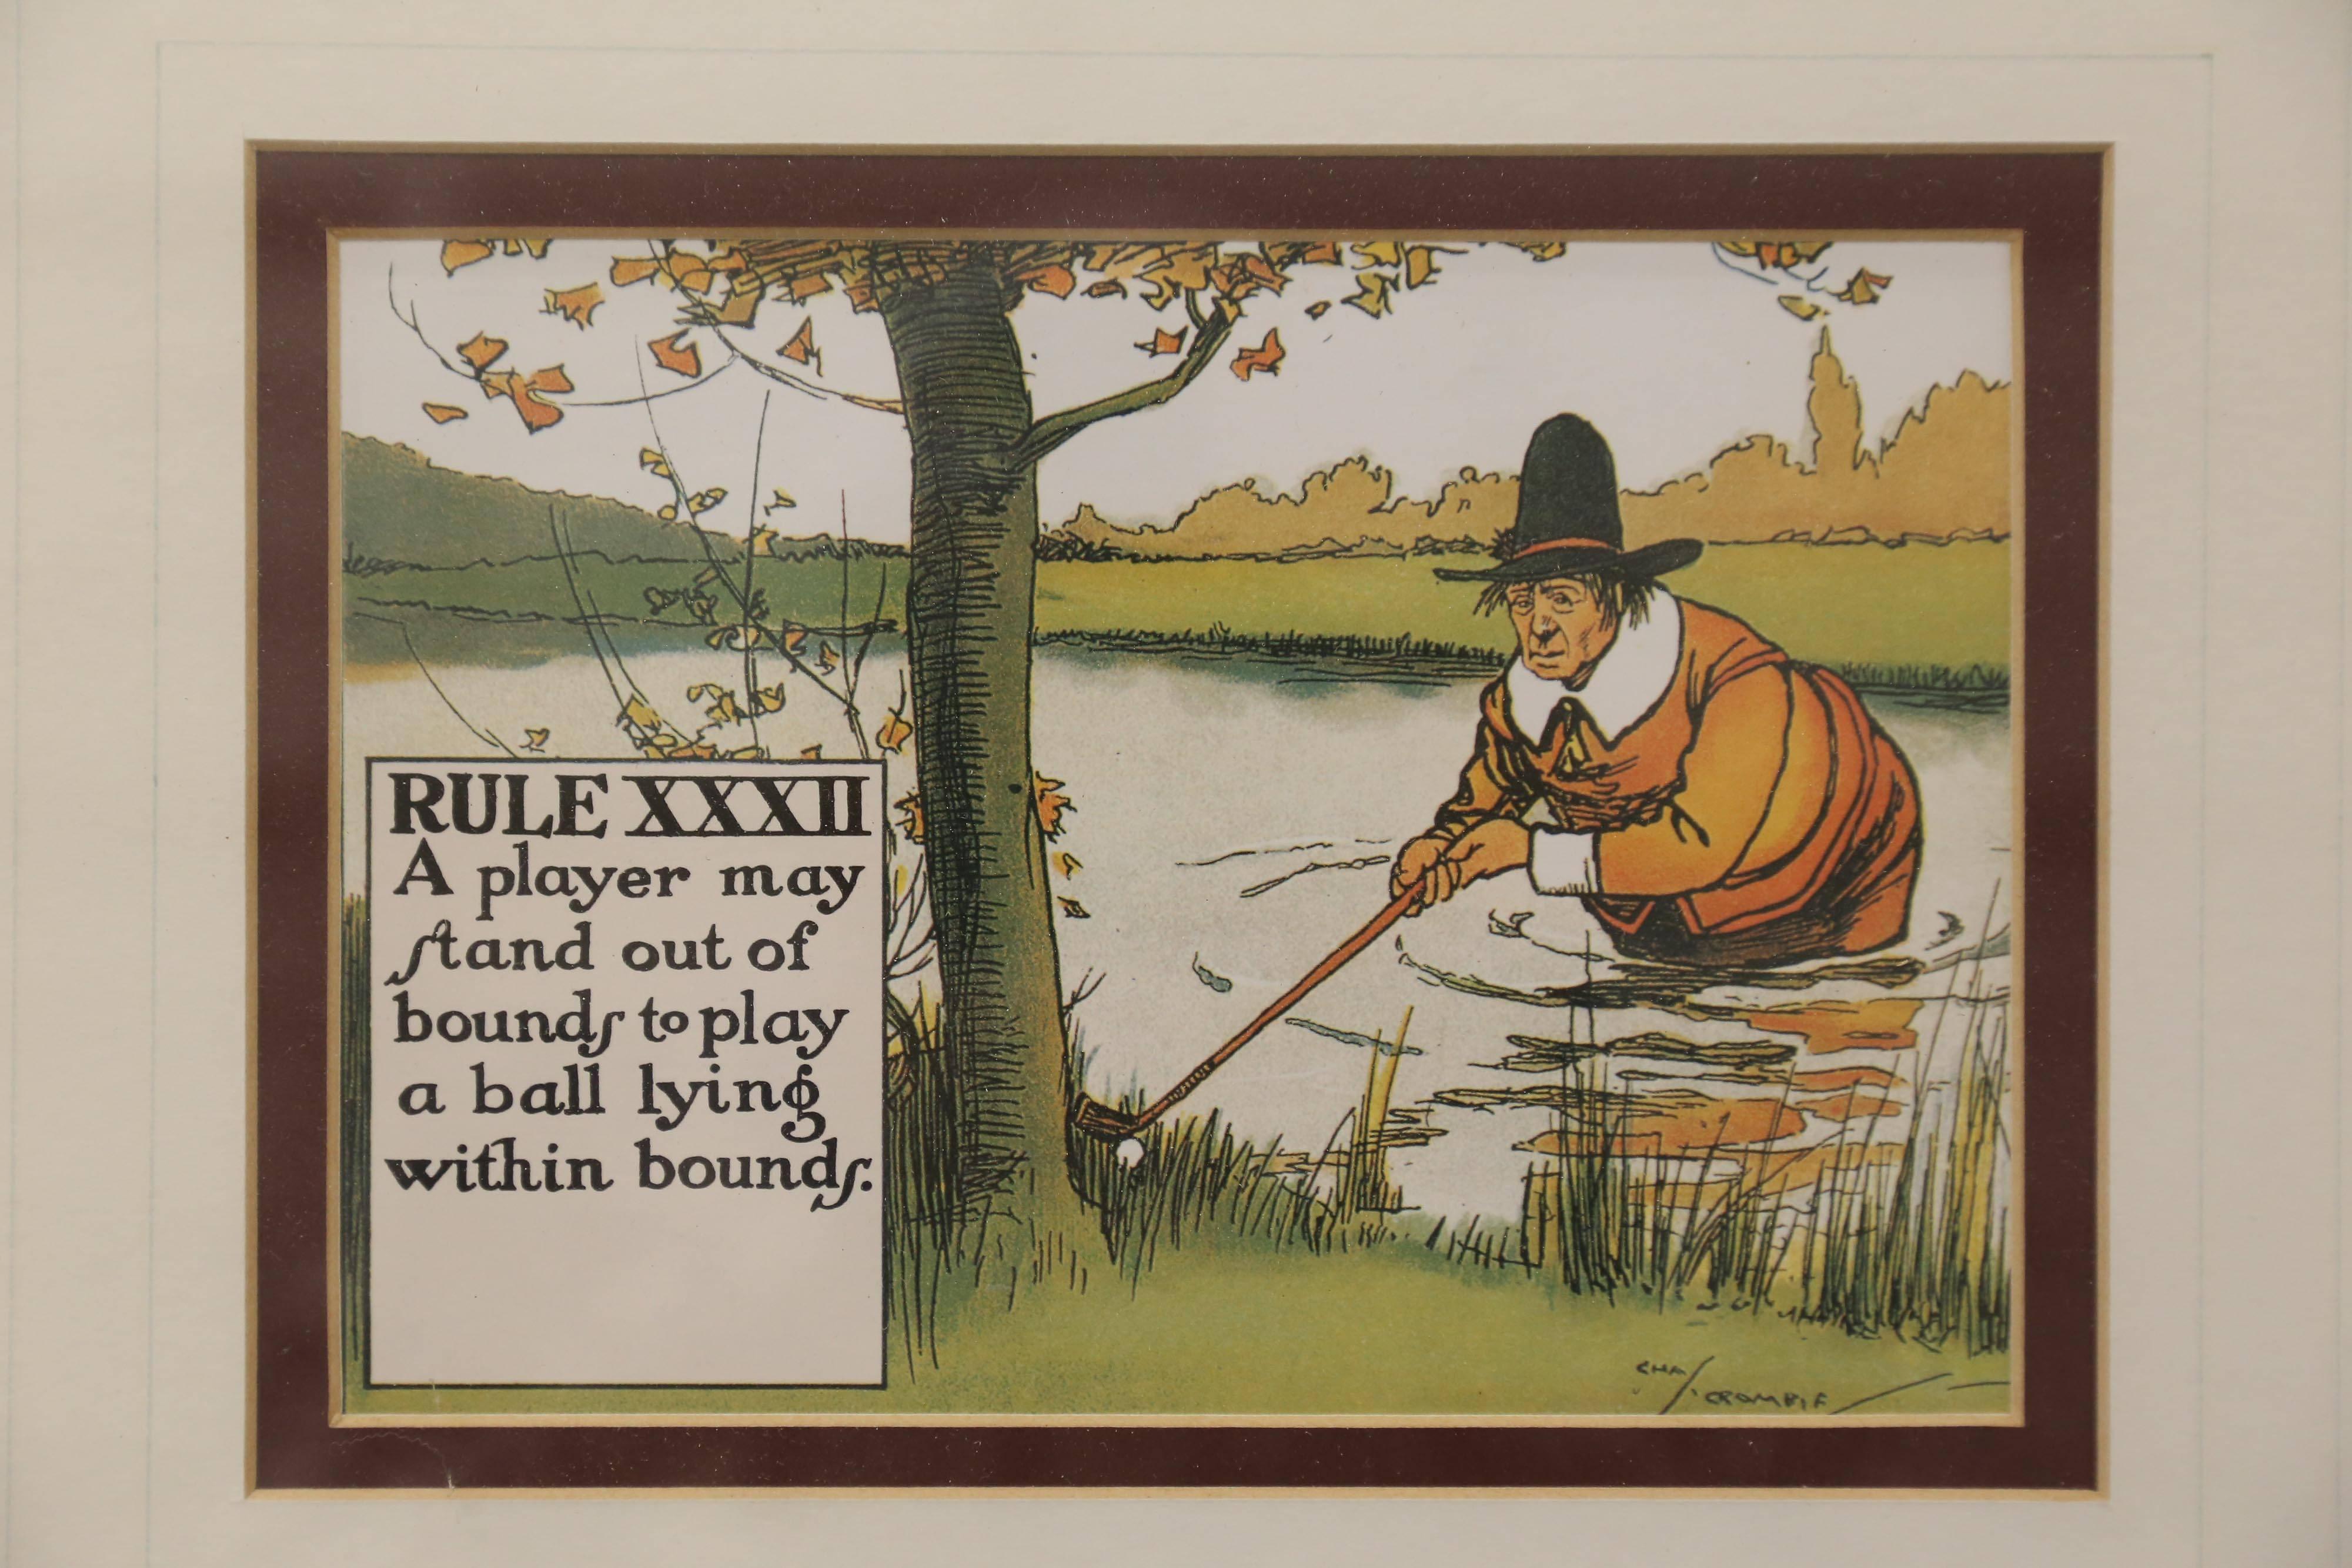 Six prints in three separate frames from the original Perrier Rules of Golf. The illustrations are by Charles Crombie, whose work is well known to the collector. The comical Crombie prints on the rules of golf were first published in book form by